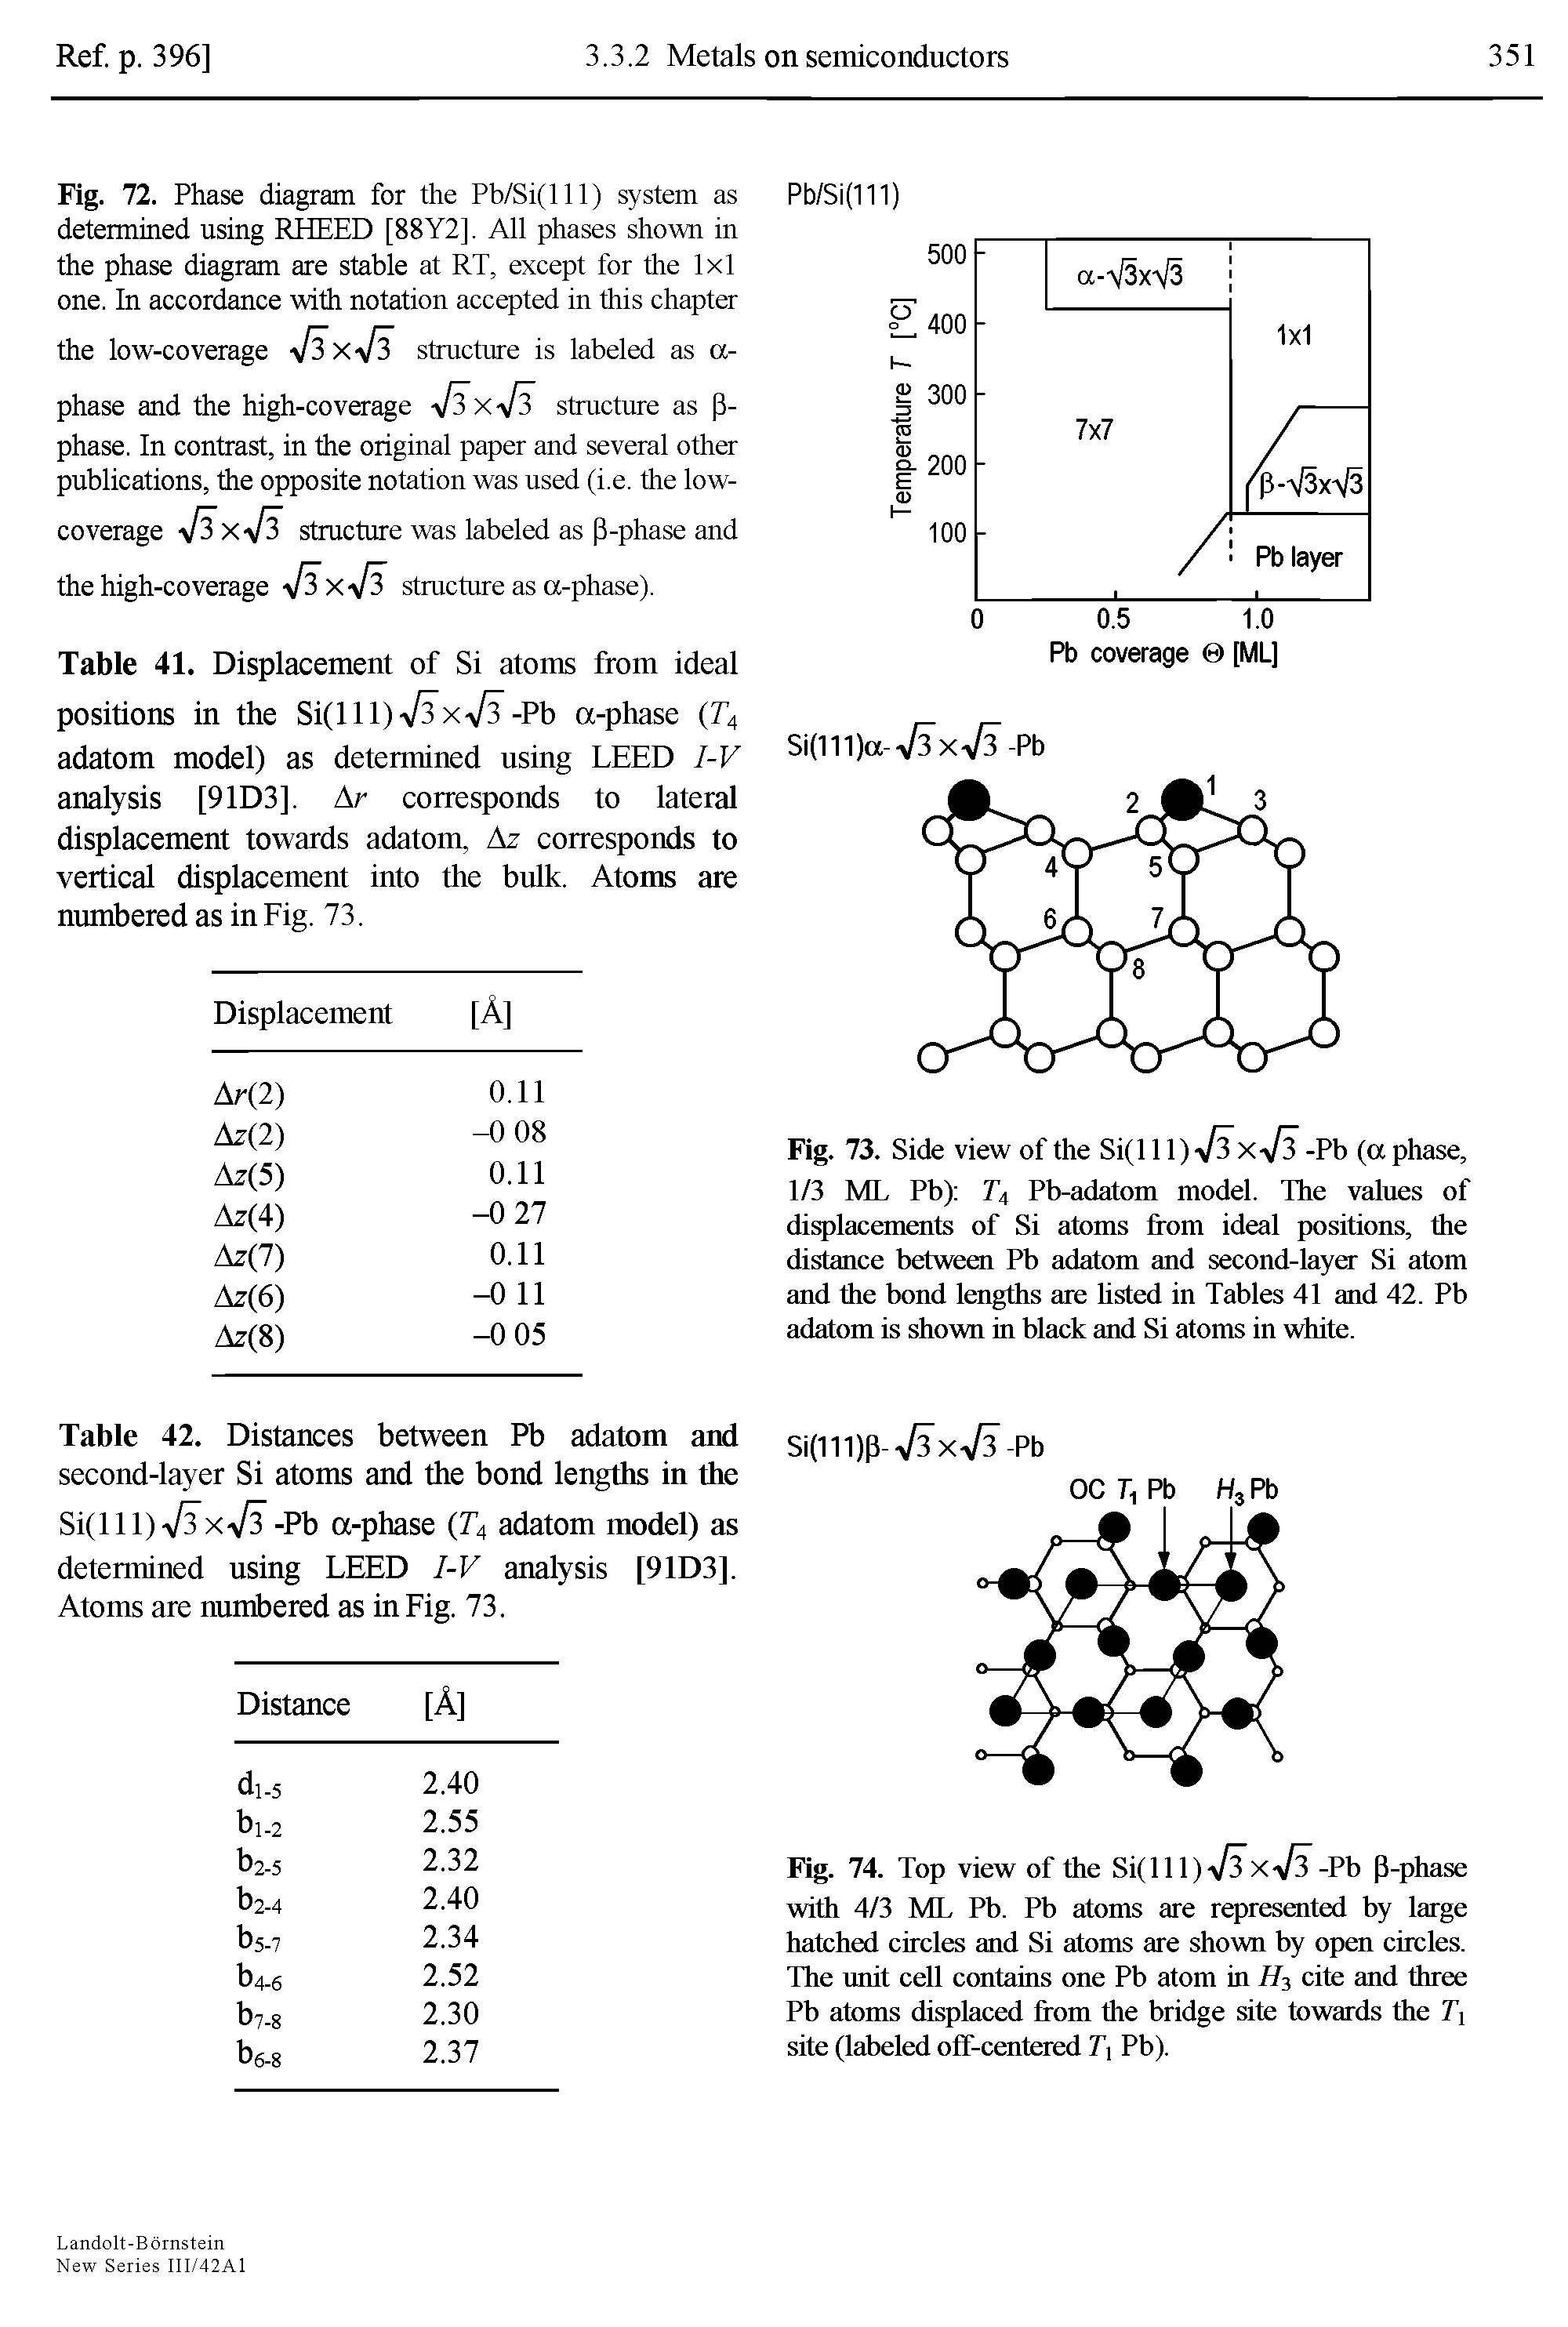 Table 41. Displacement of Si atoms from ideal positions in the Si(lll) Vs xVs-Pb a-phase T4 adatom model) as determined using LEED I-V analysis [91D3]. Ar corresponds to lateral displacement towards adatom, Az corresponds to vertical displacement into the bulk. Atoms are numbered as in Fig. 73.